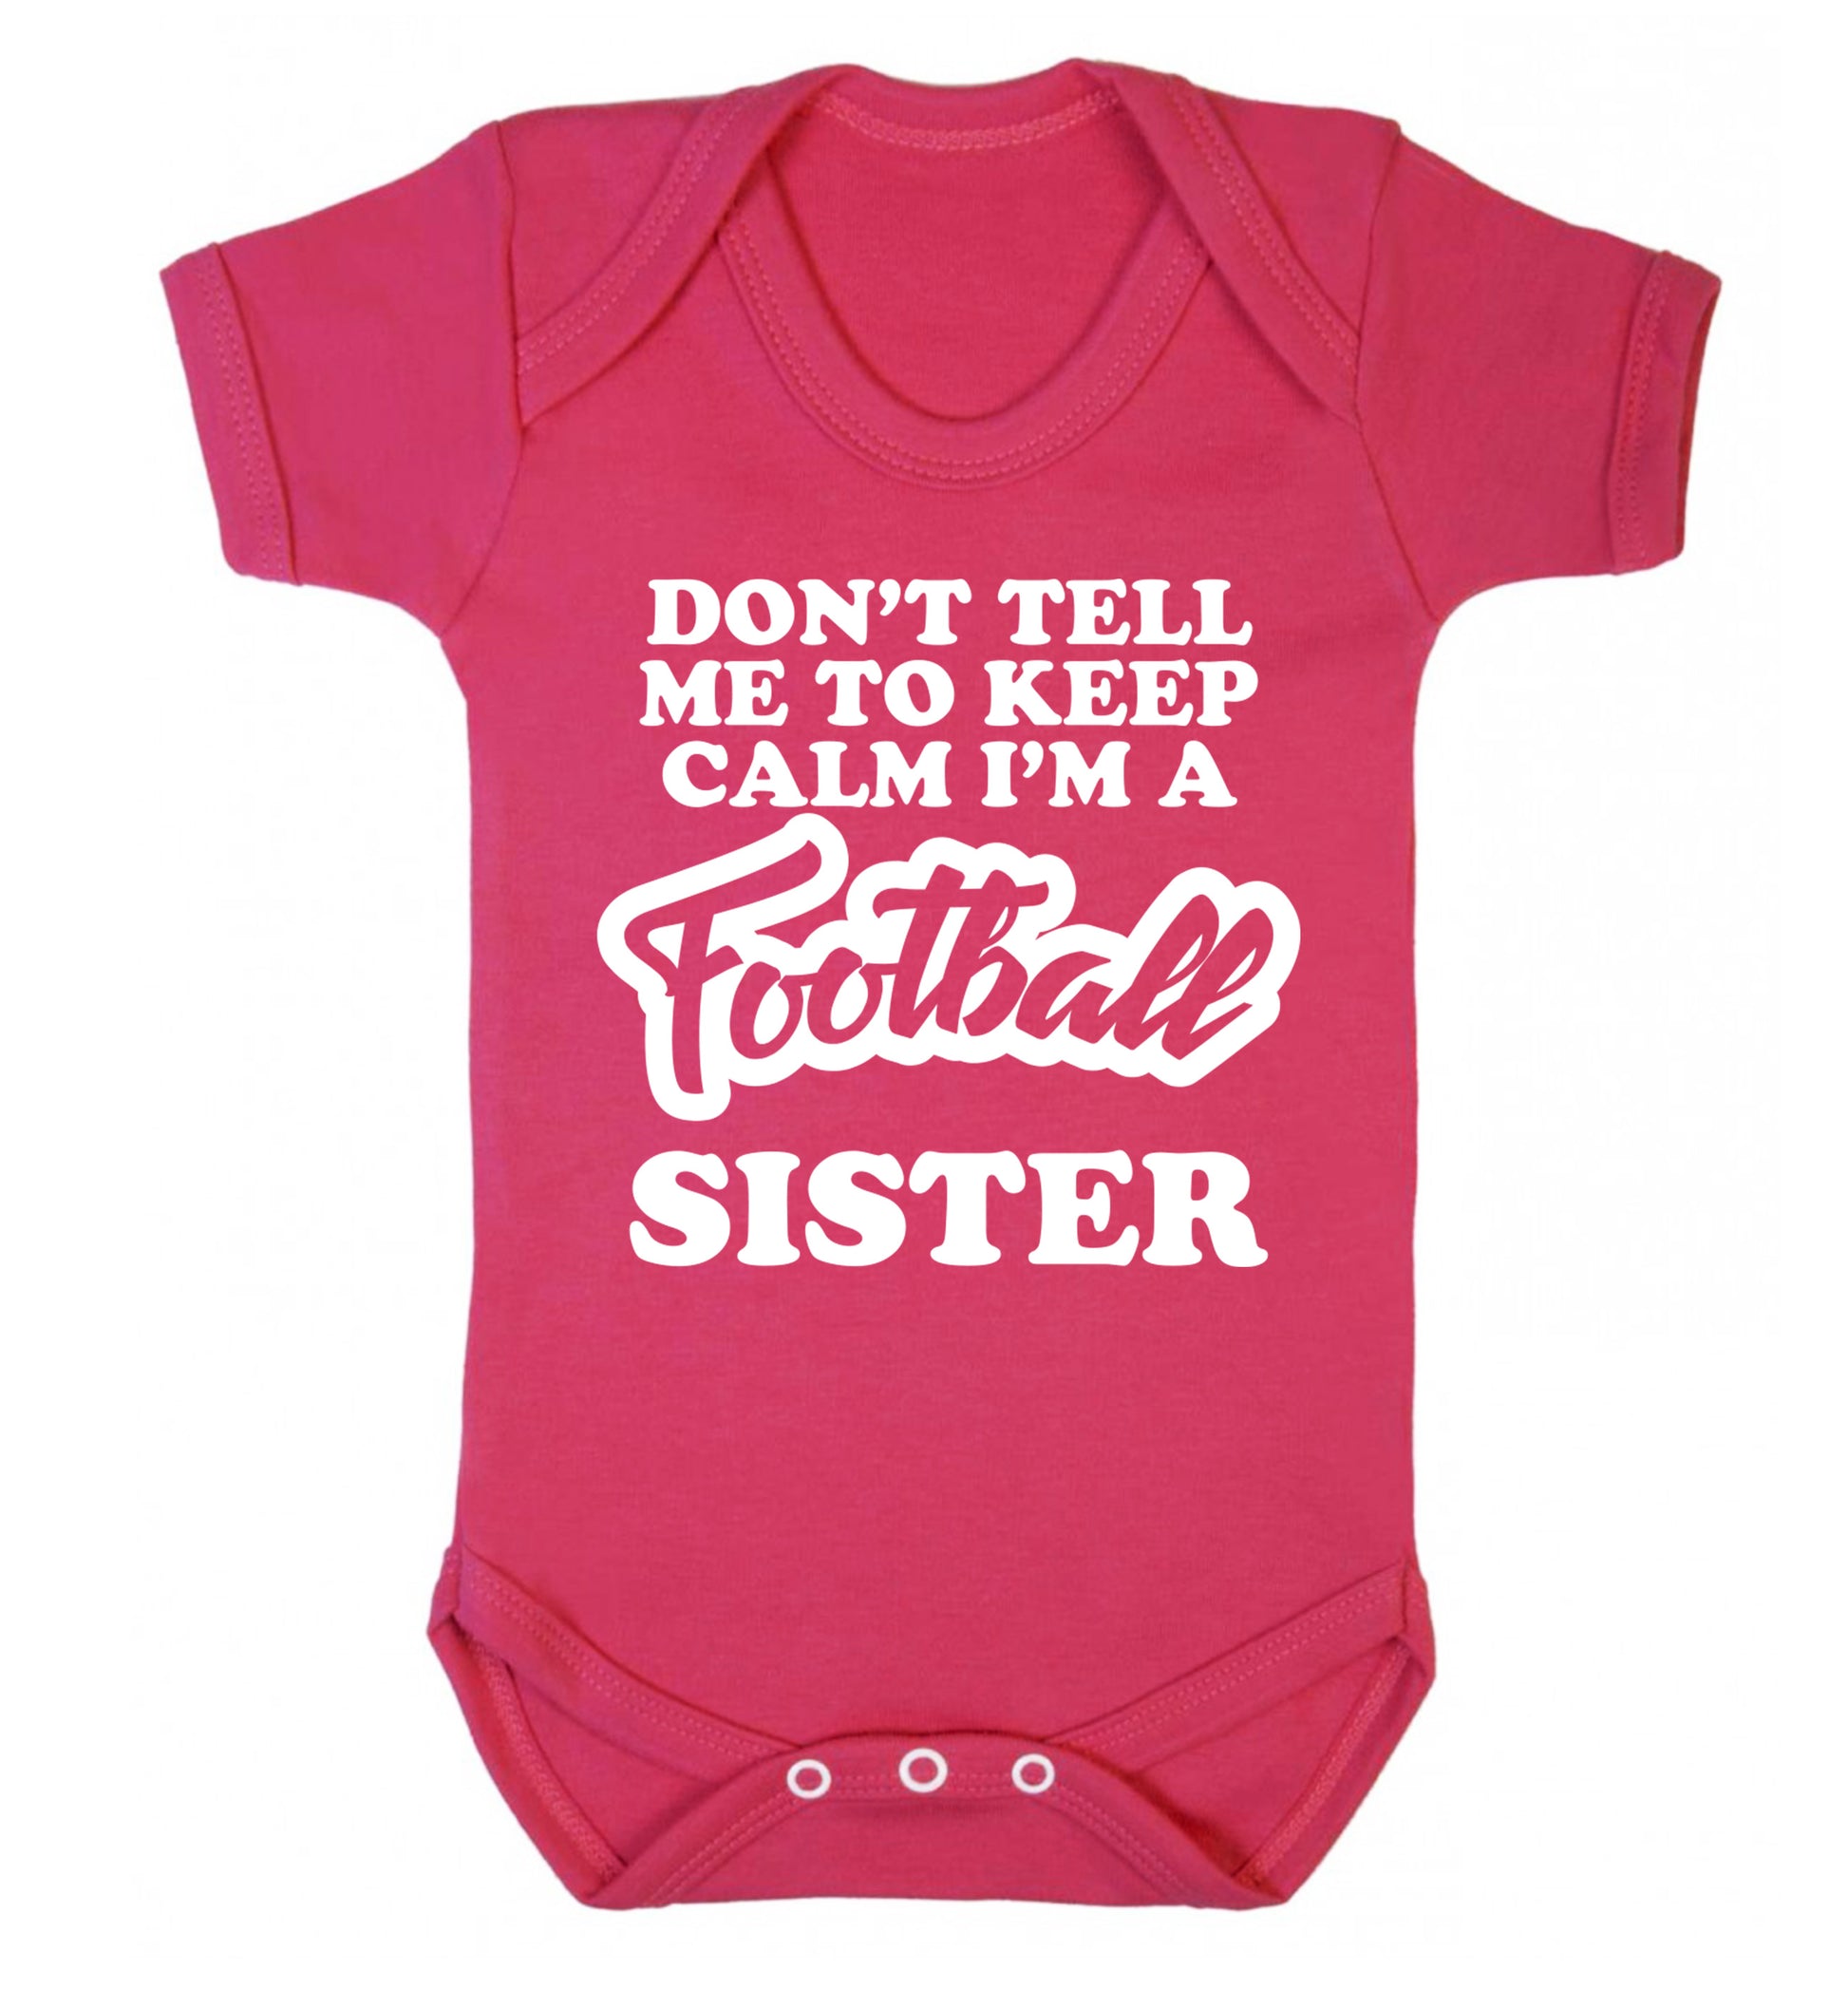 Don't tell me to keep calm I'm a football sister Baby Vest dark pink 18-24 months